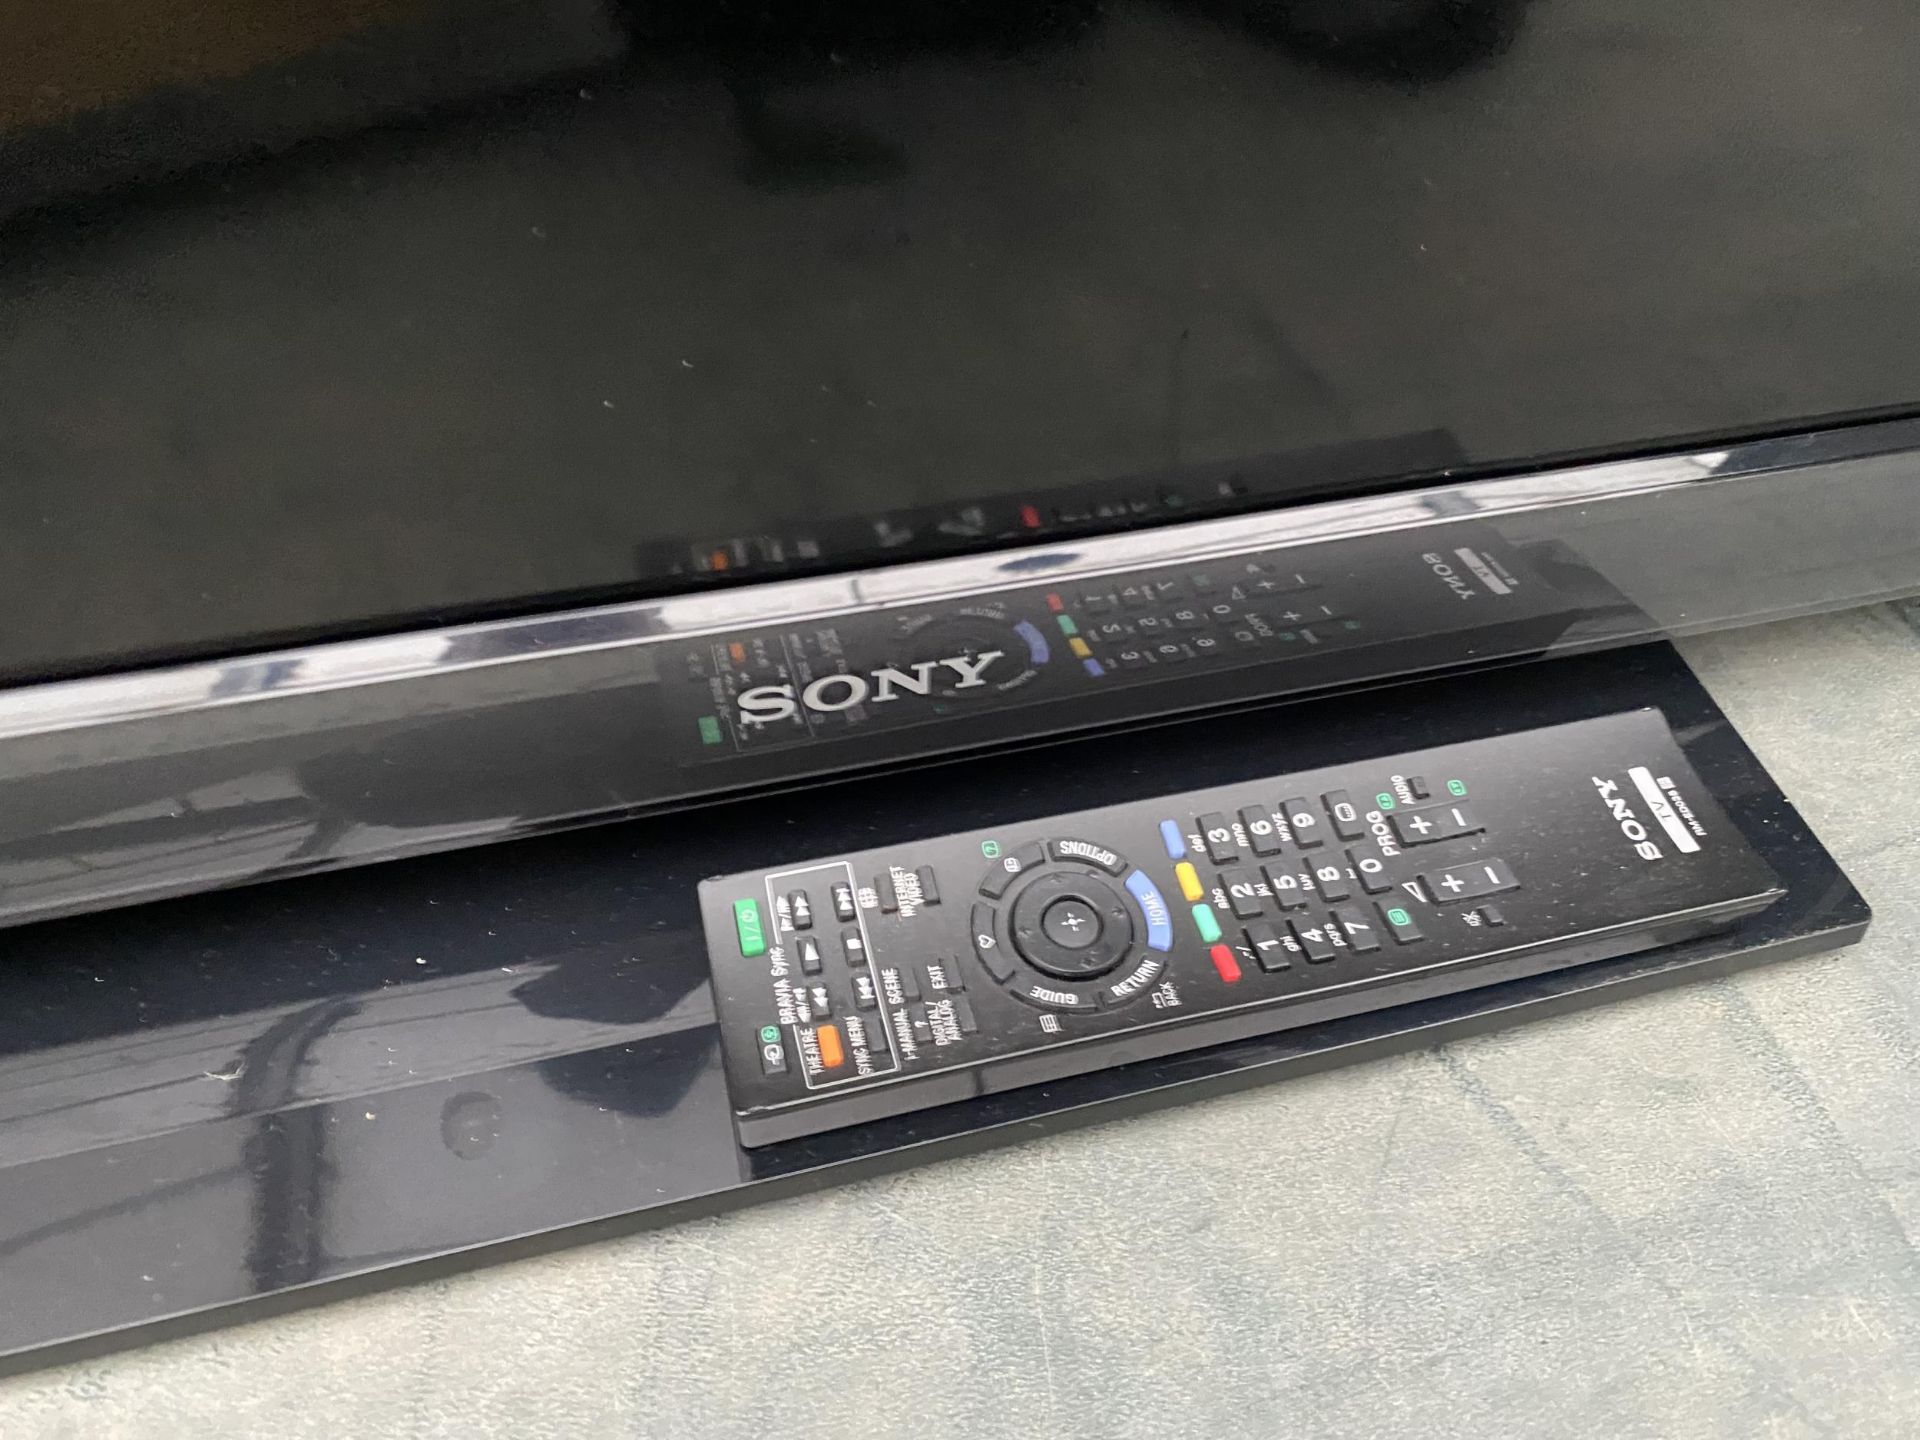 A SONY 32" TELEVISION WITH REMOTE CONTROL - Image 2 of 3